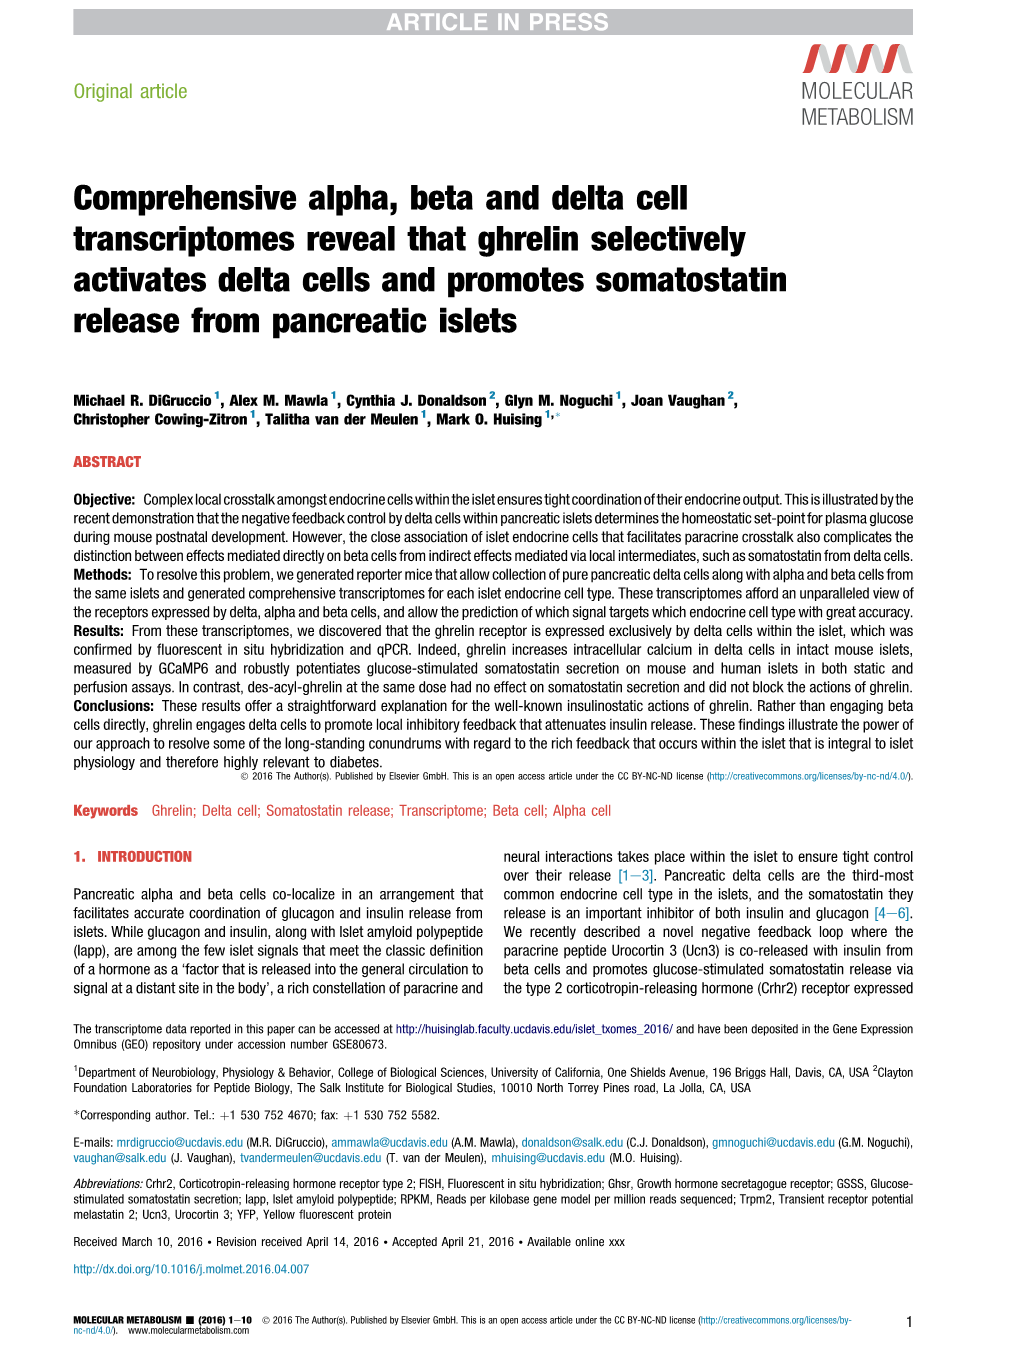 Comprehensive Alpha, Beta and Delta Cell Transcriptomes Reveal That Ghrelin Selectively Activates Delta Cells and Promotes Somatostatin Release from Pancreatic Islets